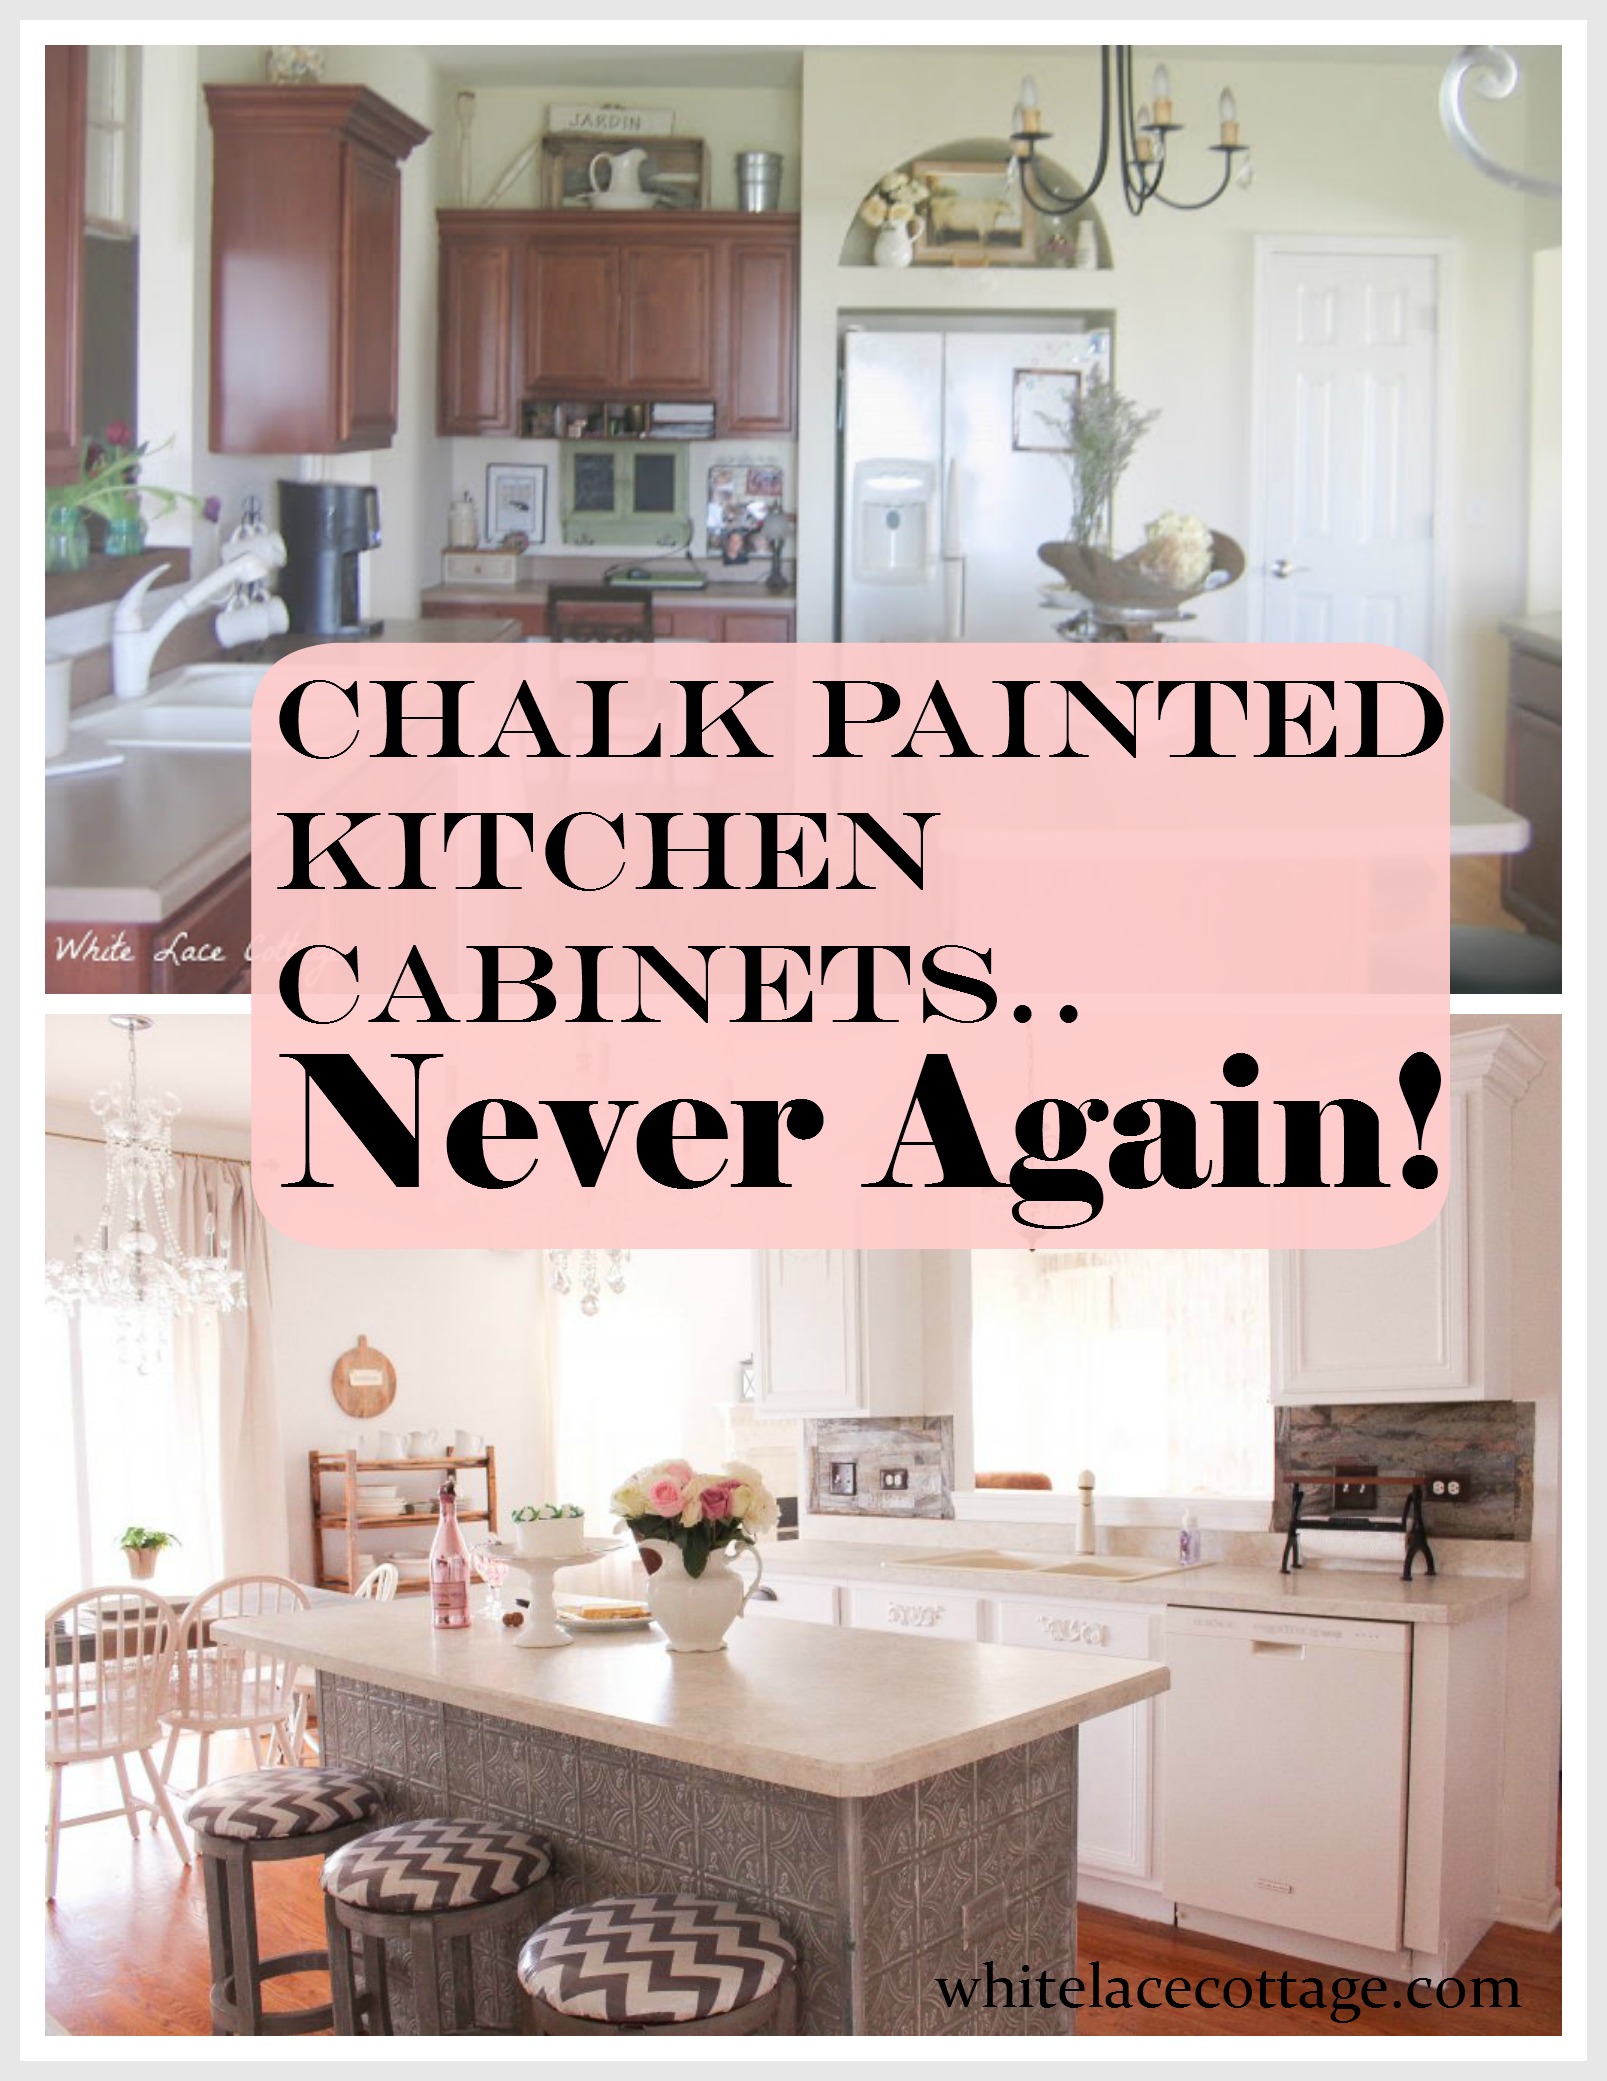 Chalk Painted Kitchen Cabinets Never Again Anne P Makeup And More,Abstract The Art Of Design Season 2 Watch Online Free